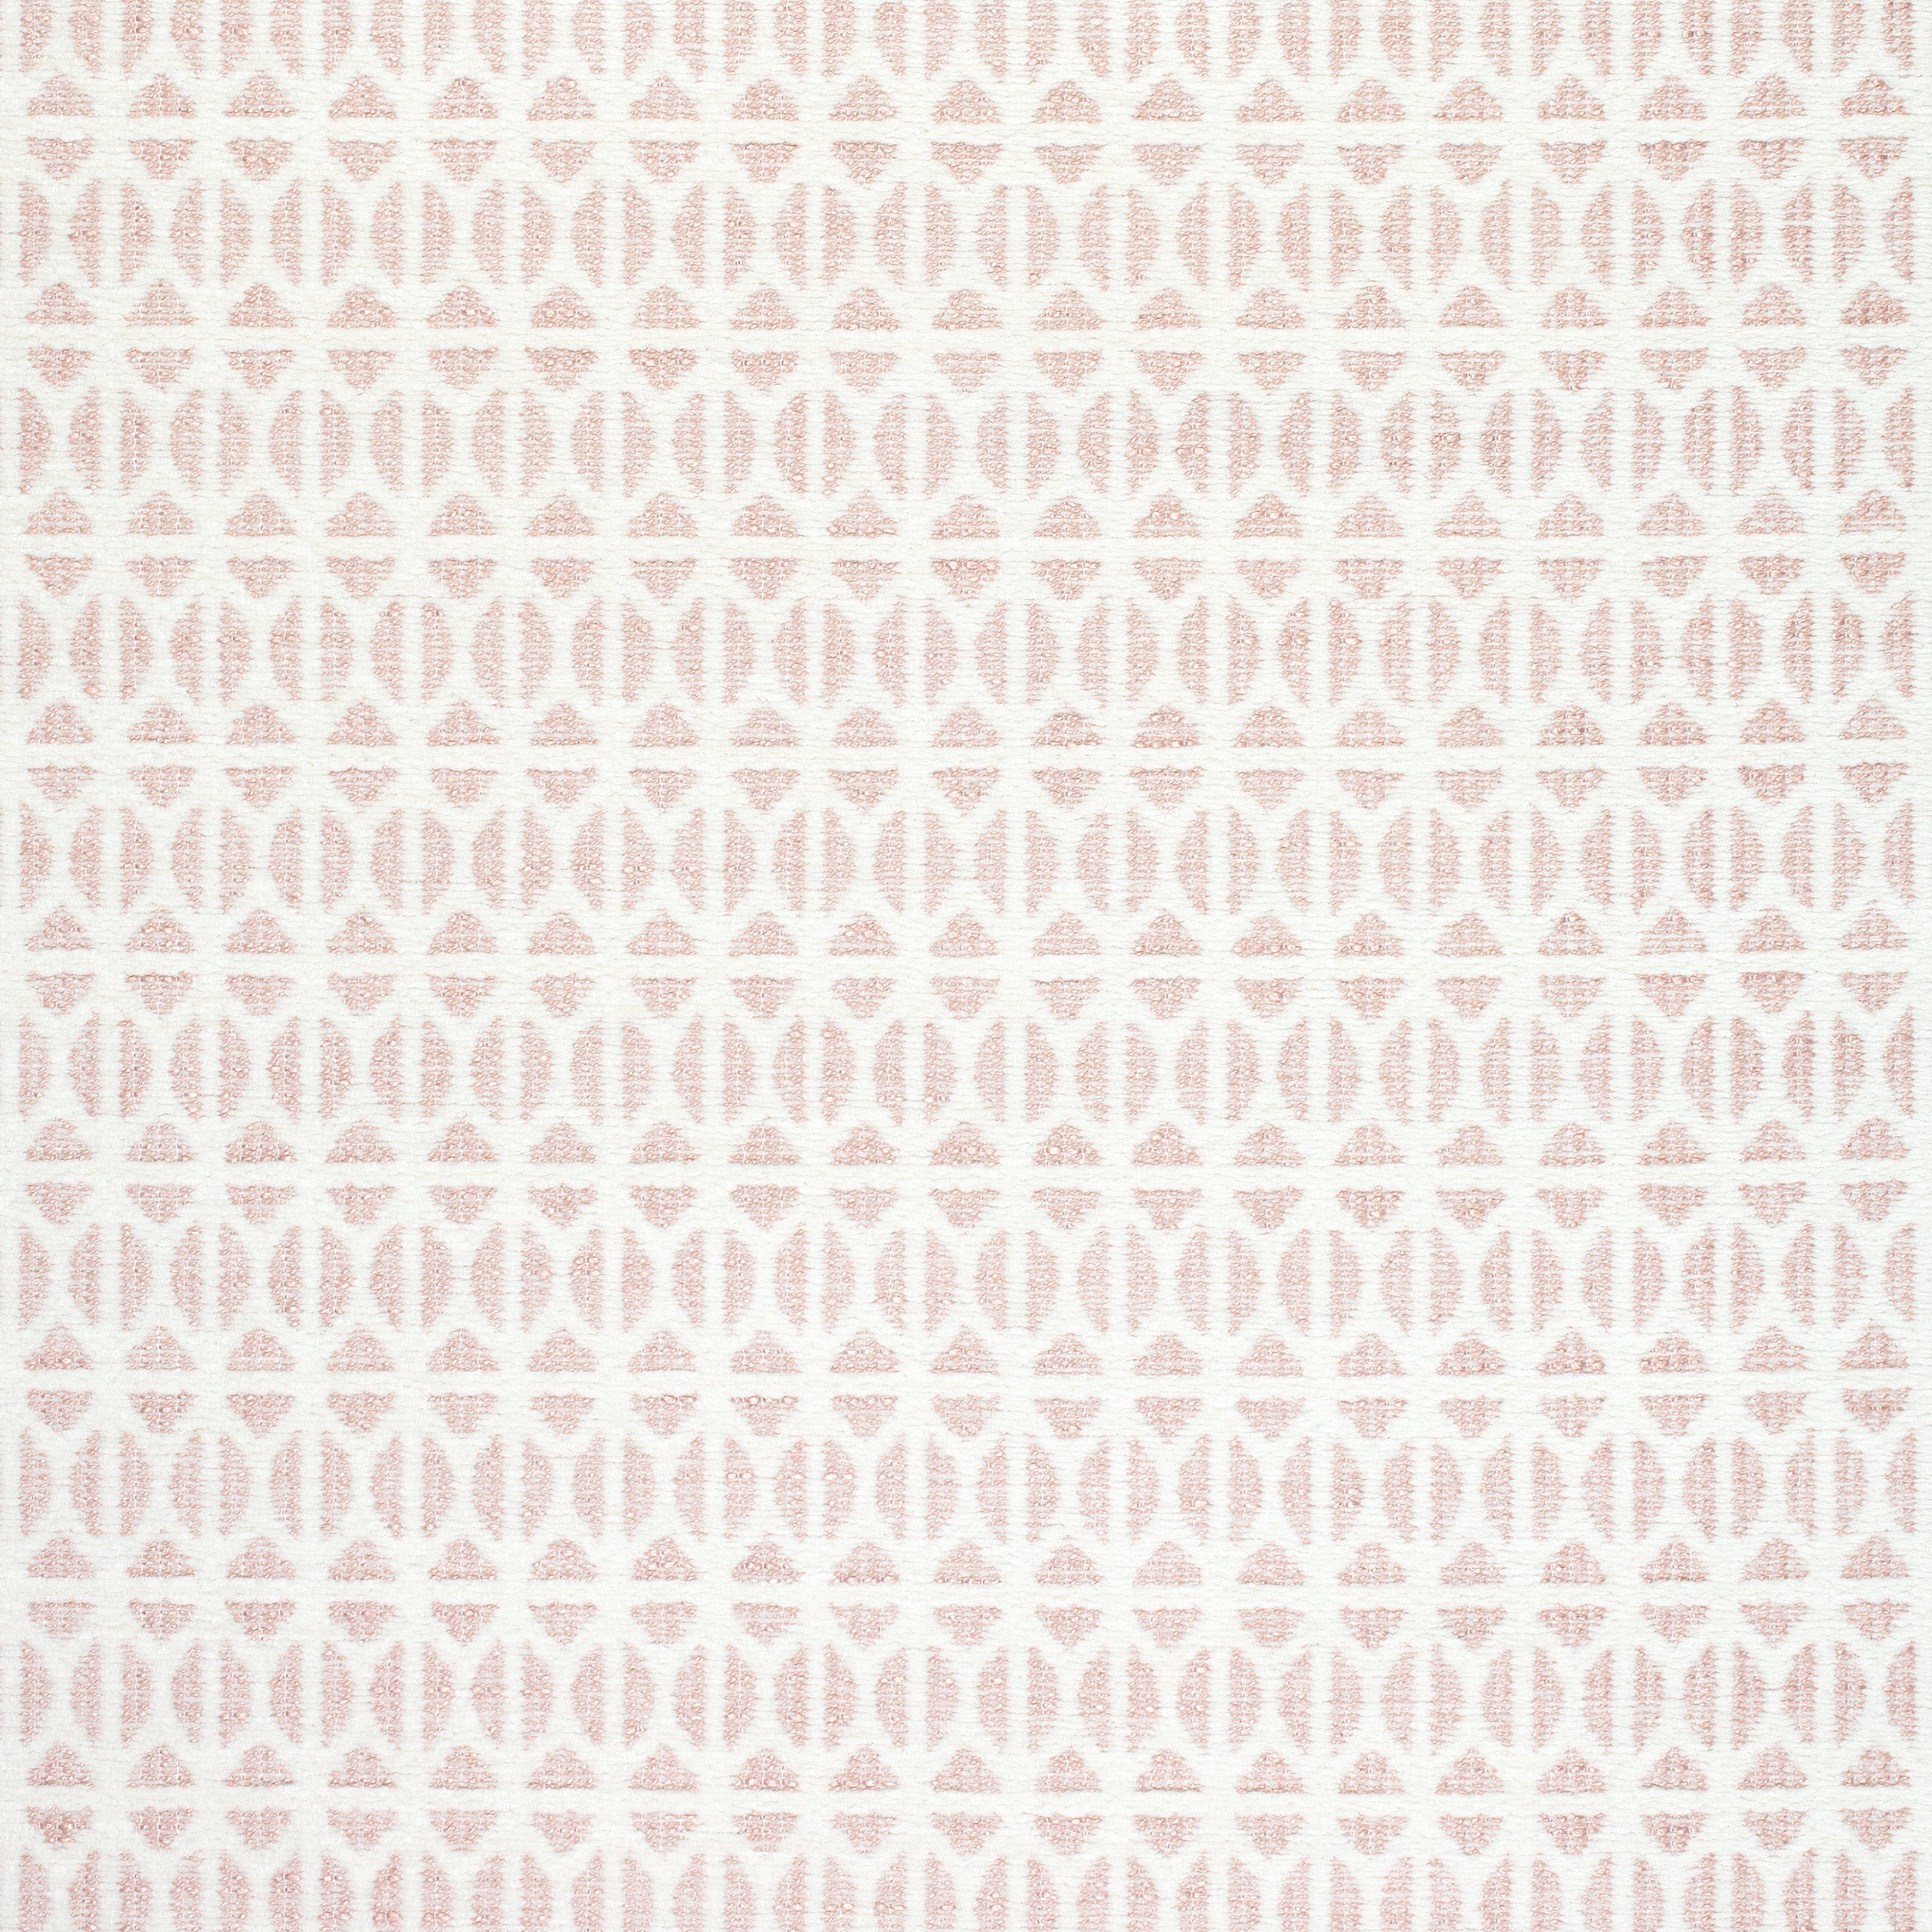 Quinlan fabric in blush color - pattern number W789106 - by Thibaut in the Reverie collection